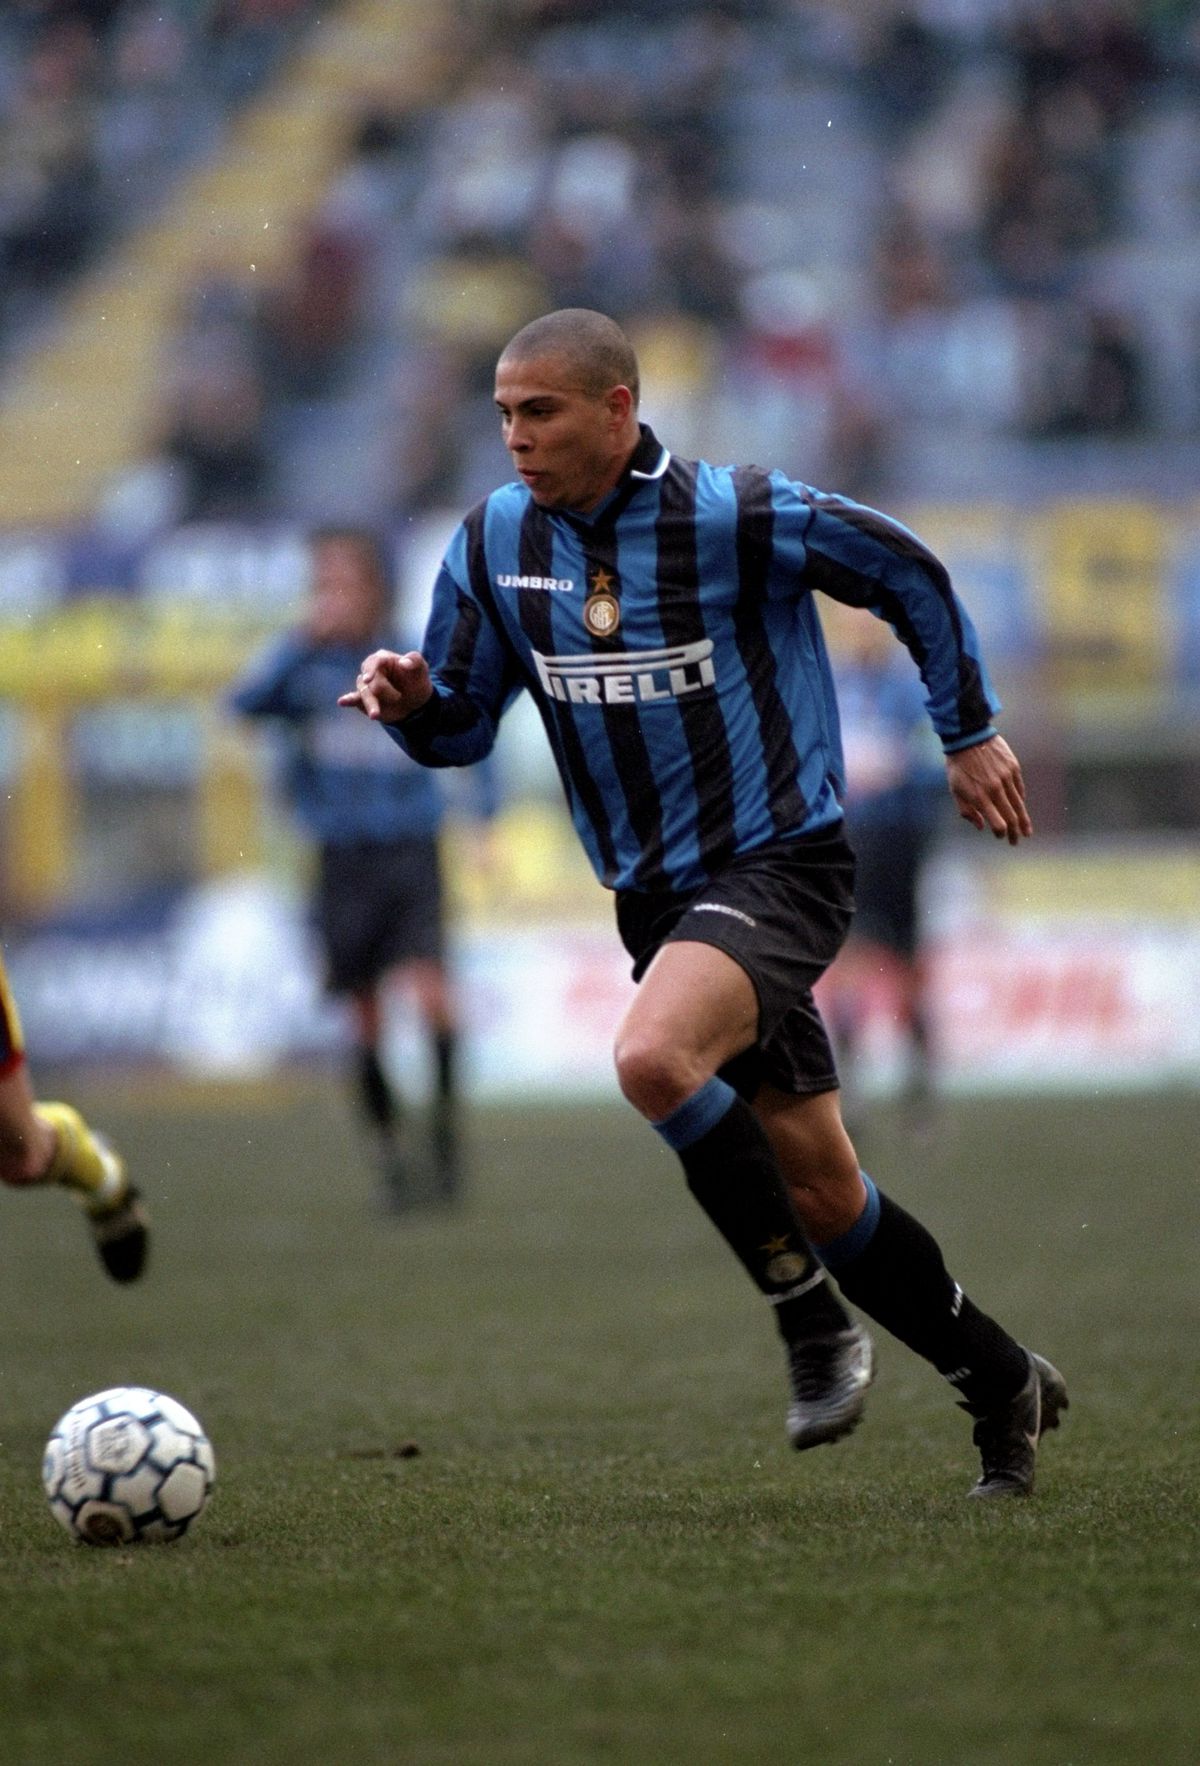 Ronaldo: “I wish Inter Milan another 110 years of marvellous history